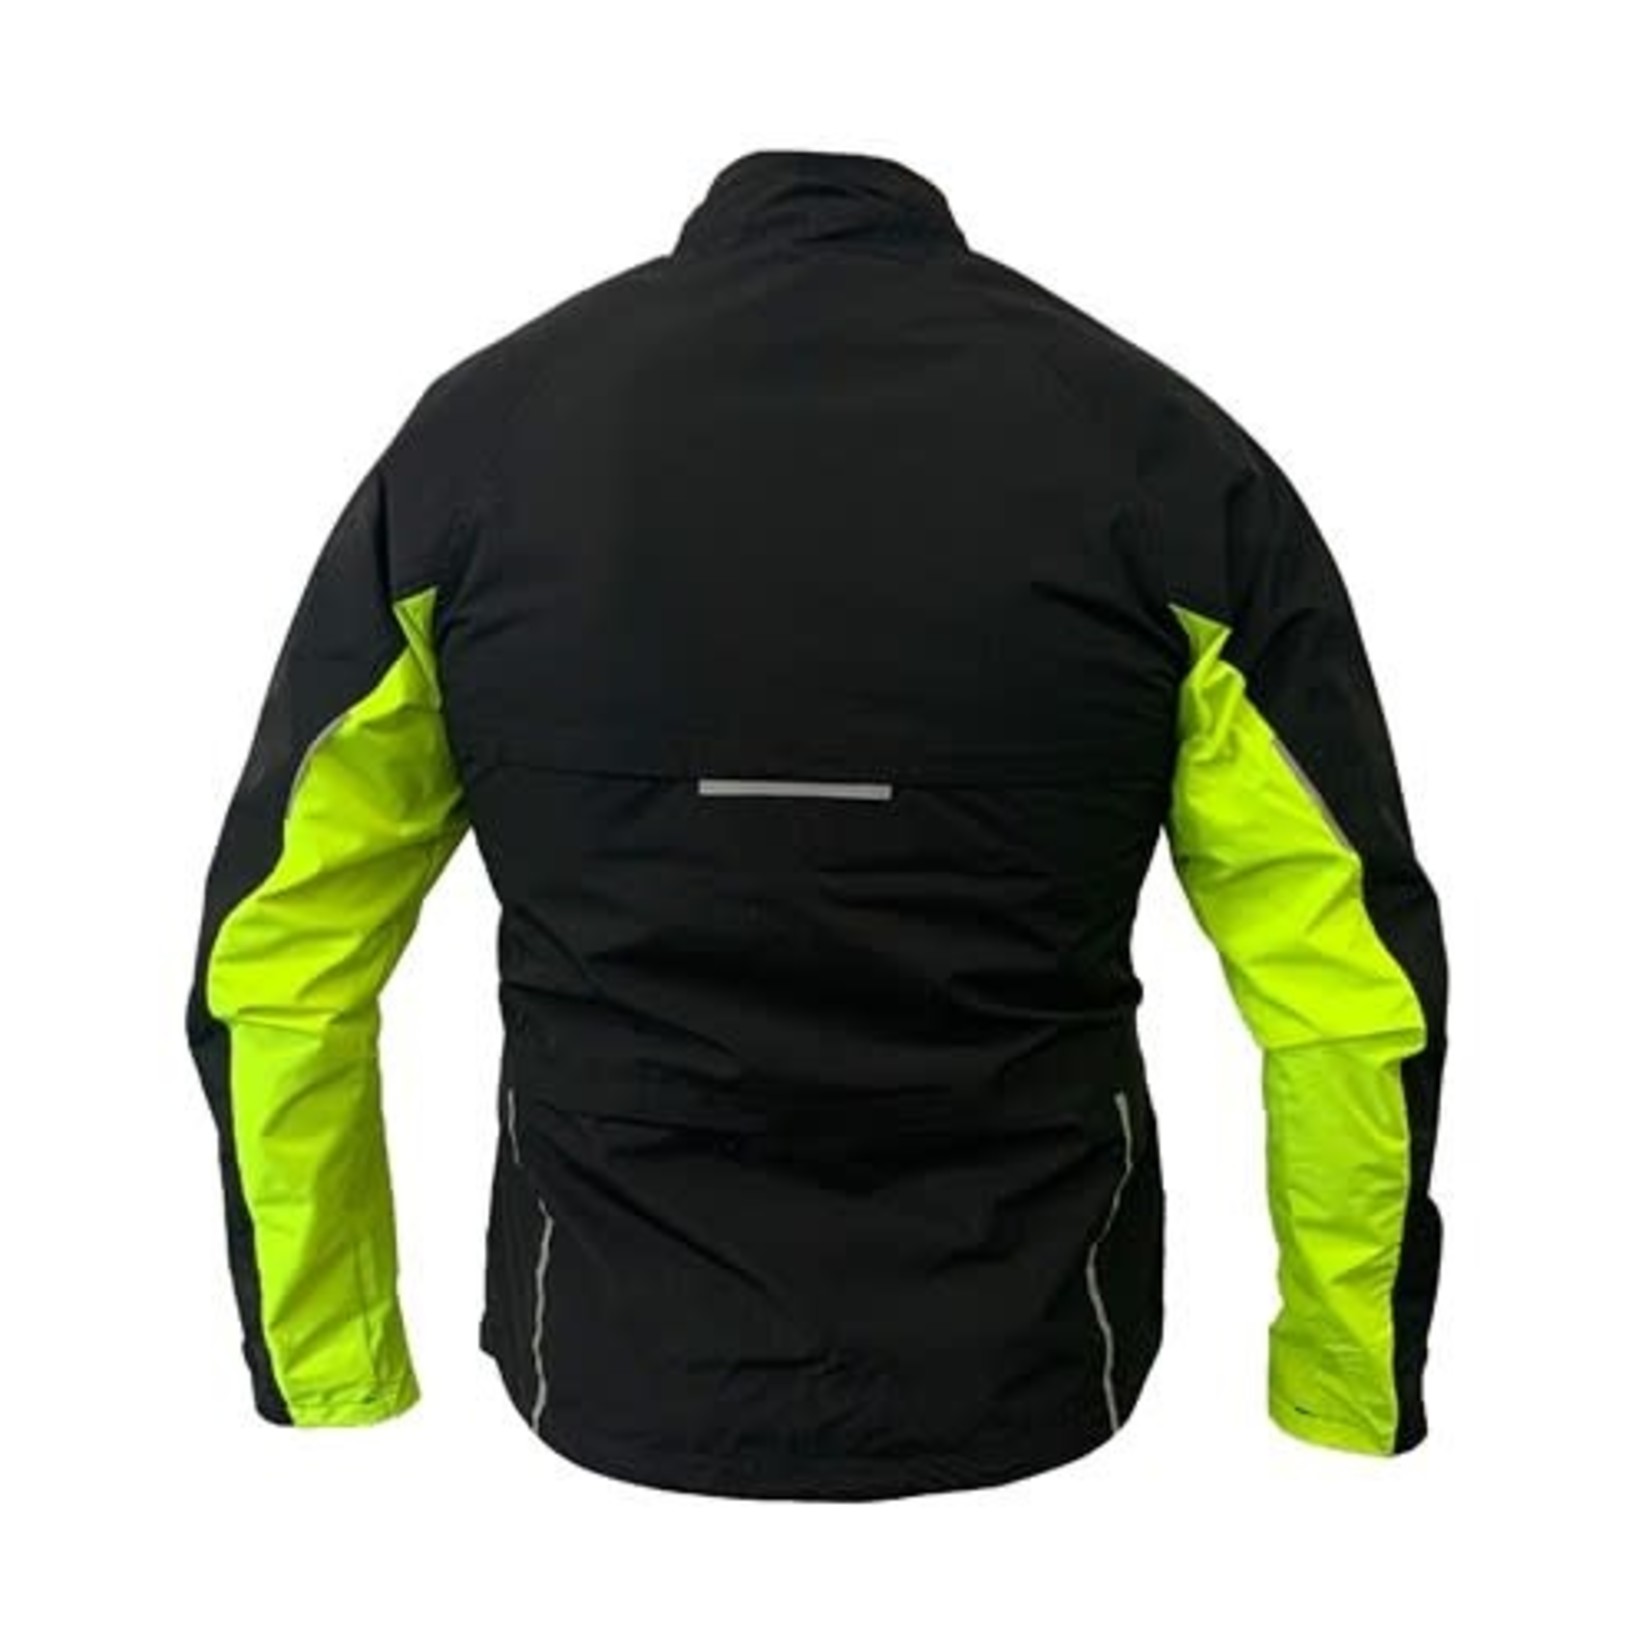 Azur Azur Bike/Cycling Graphite Jacket Polyster Water Resistant Dual Layered Fabric